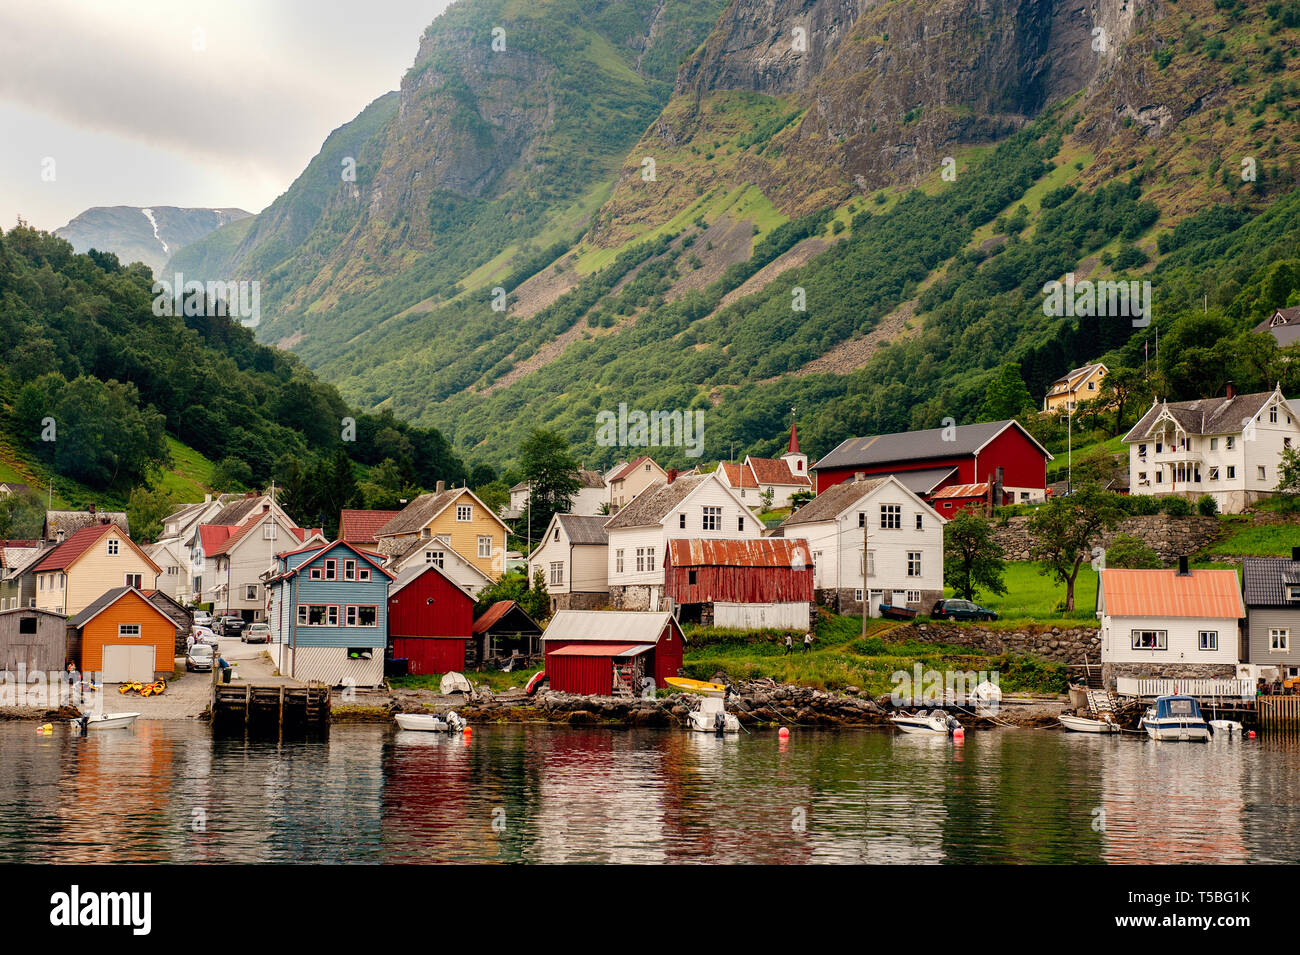 Small houses of the commune on the fjord, photographed from a ...